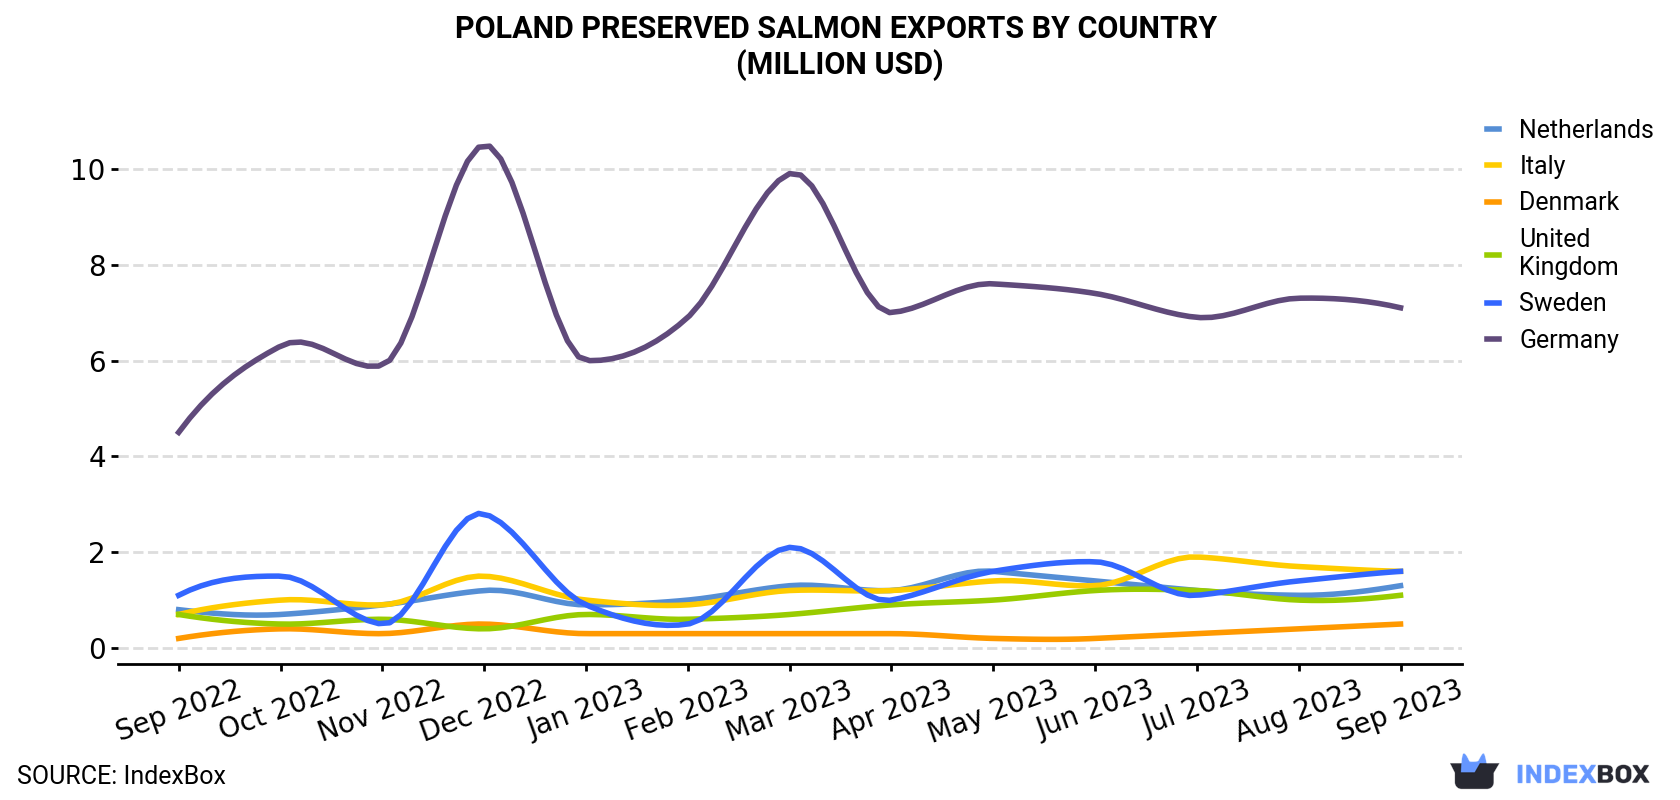 Poland Preserved Salmon Exports By Country (Million USD)